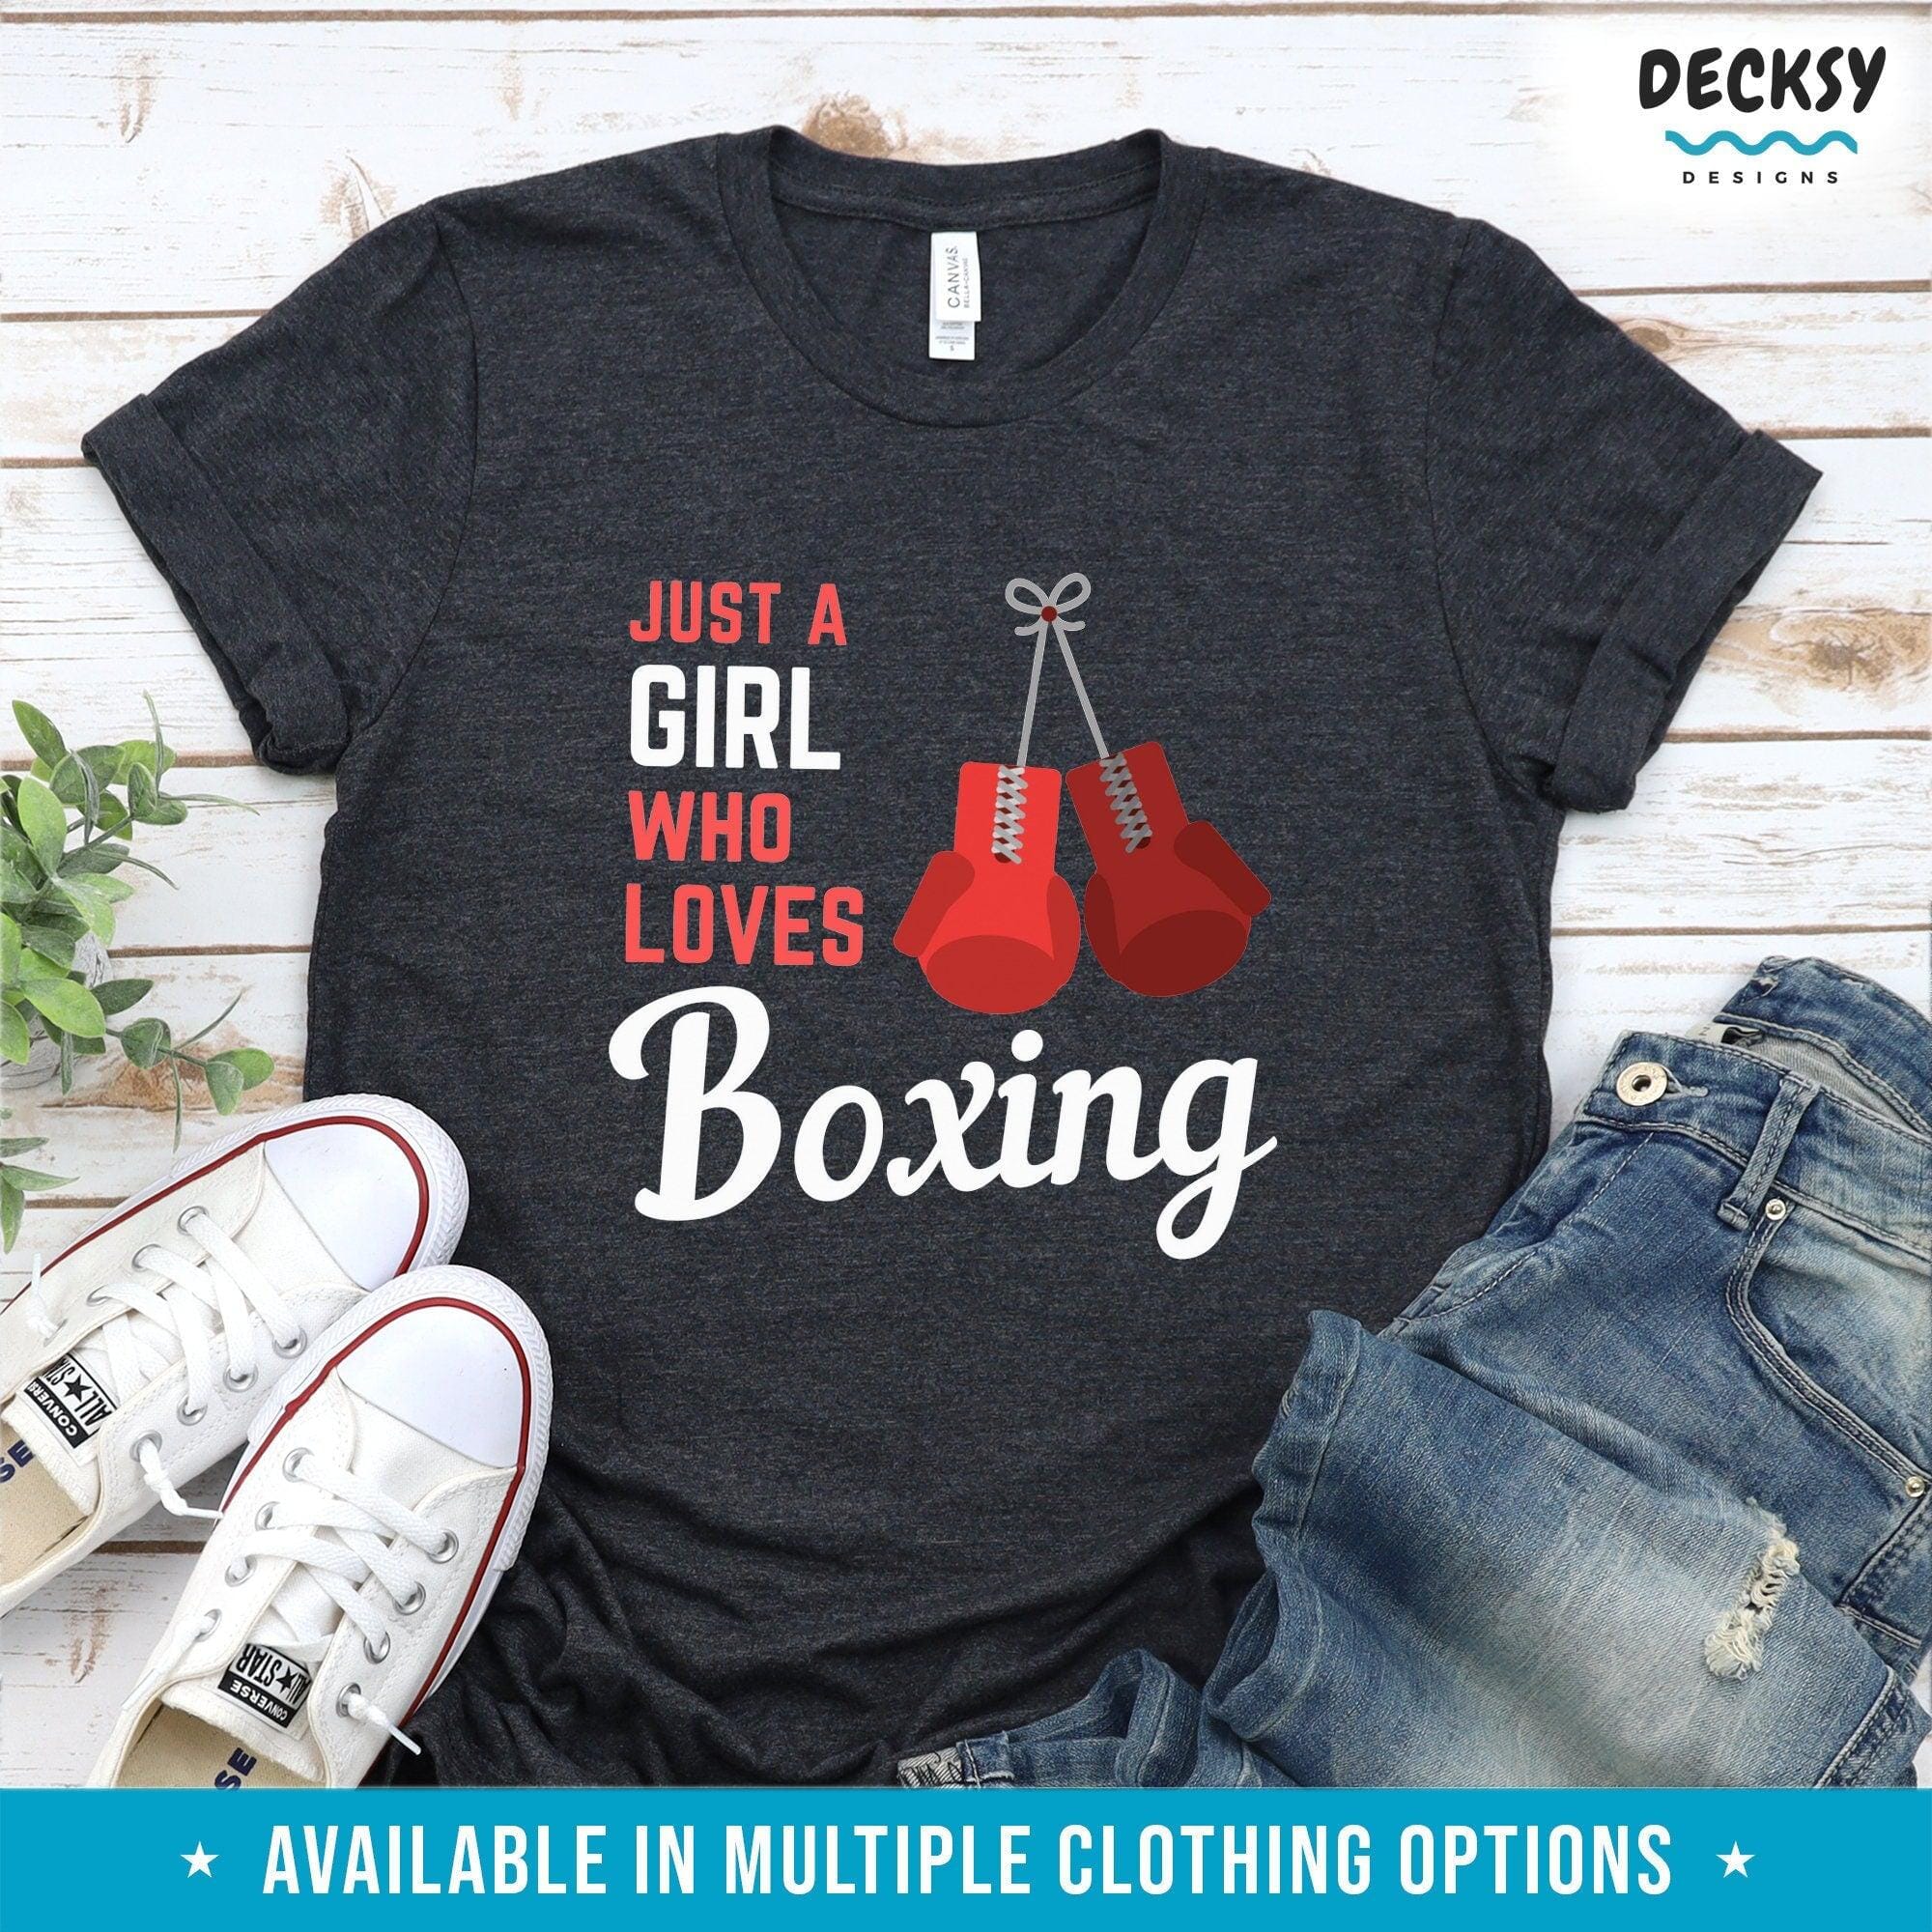 Boxing Shirt Women, Funny Boxer Gift-Clothing:Gender-Neutral Adult Clothing:Tops & Tees:T-shirts:Graphic Tees-DecksyDesigns